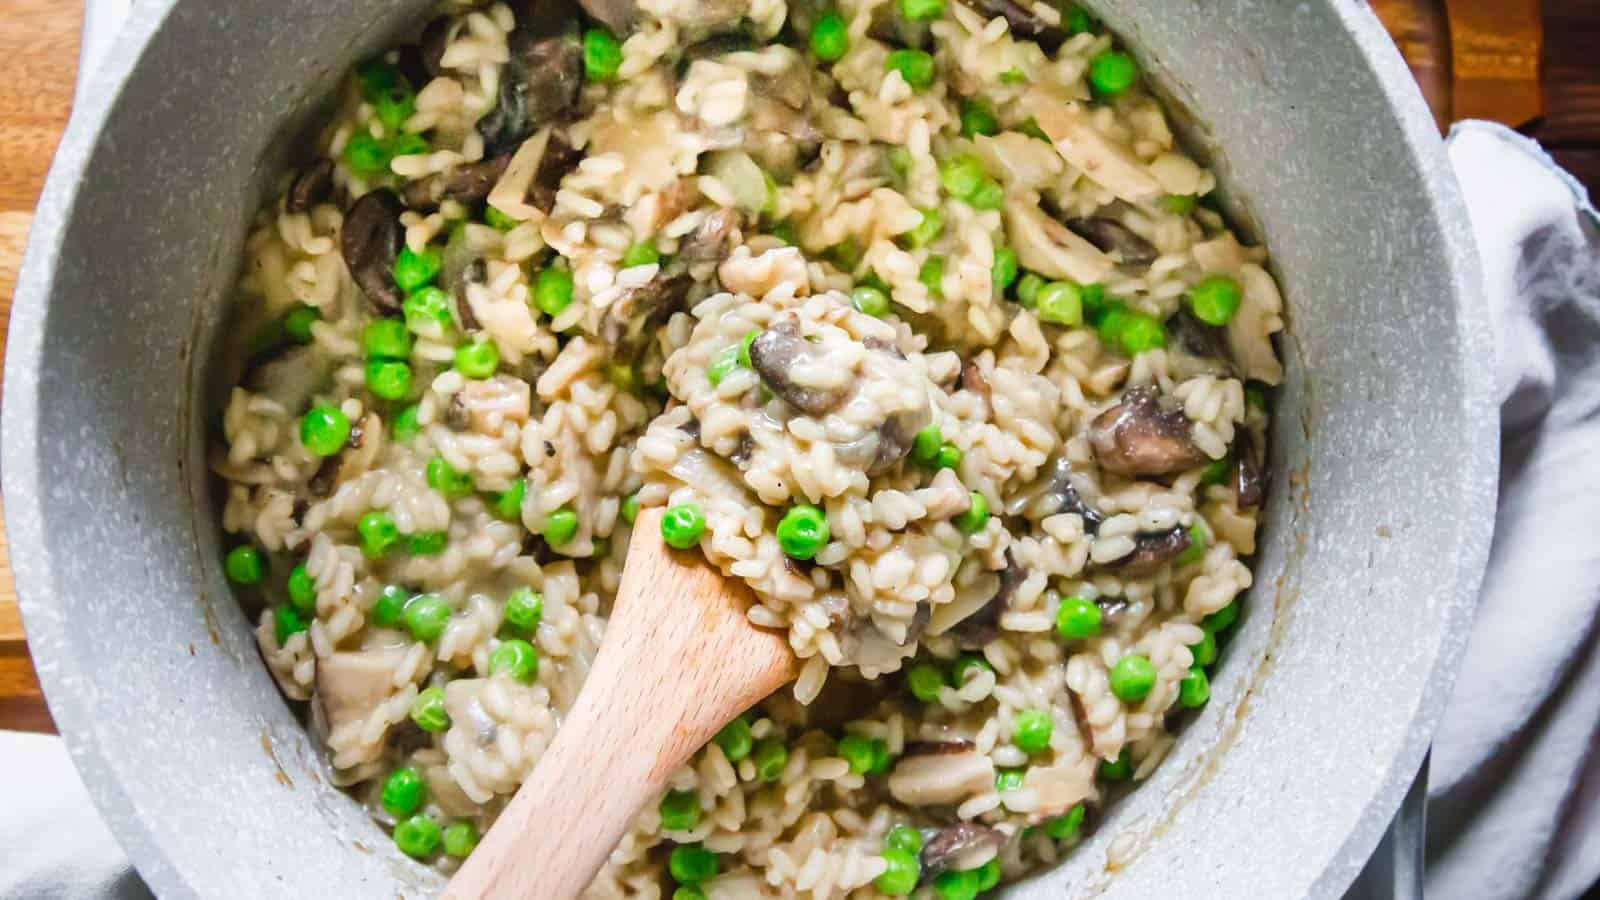 Mushroom risotto with peas and mushrooms in a pot with wooden spoon.